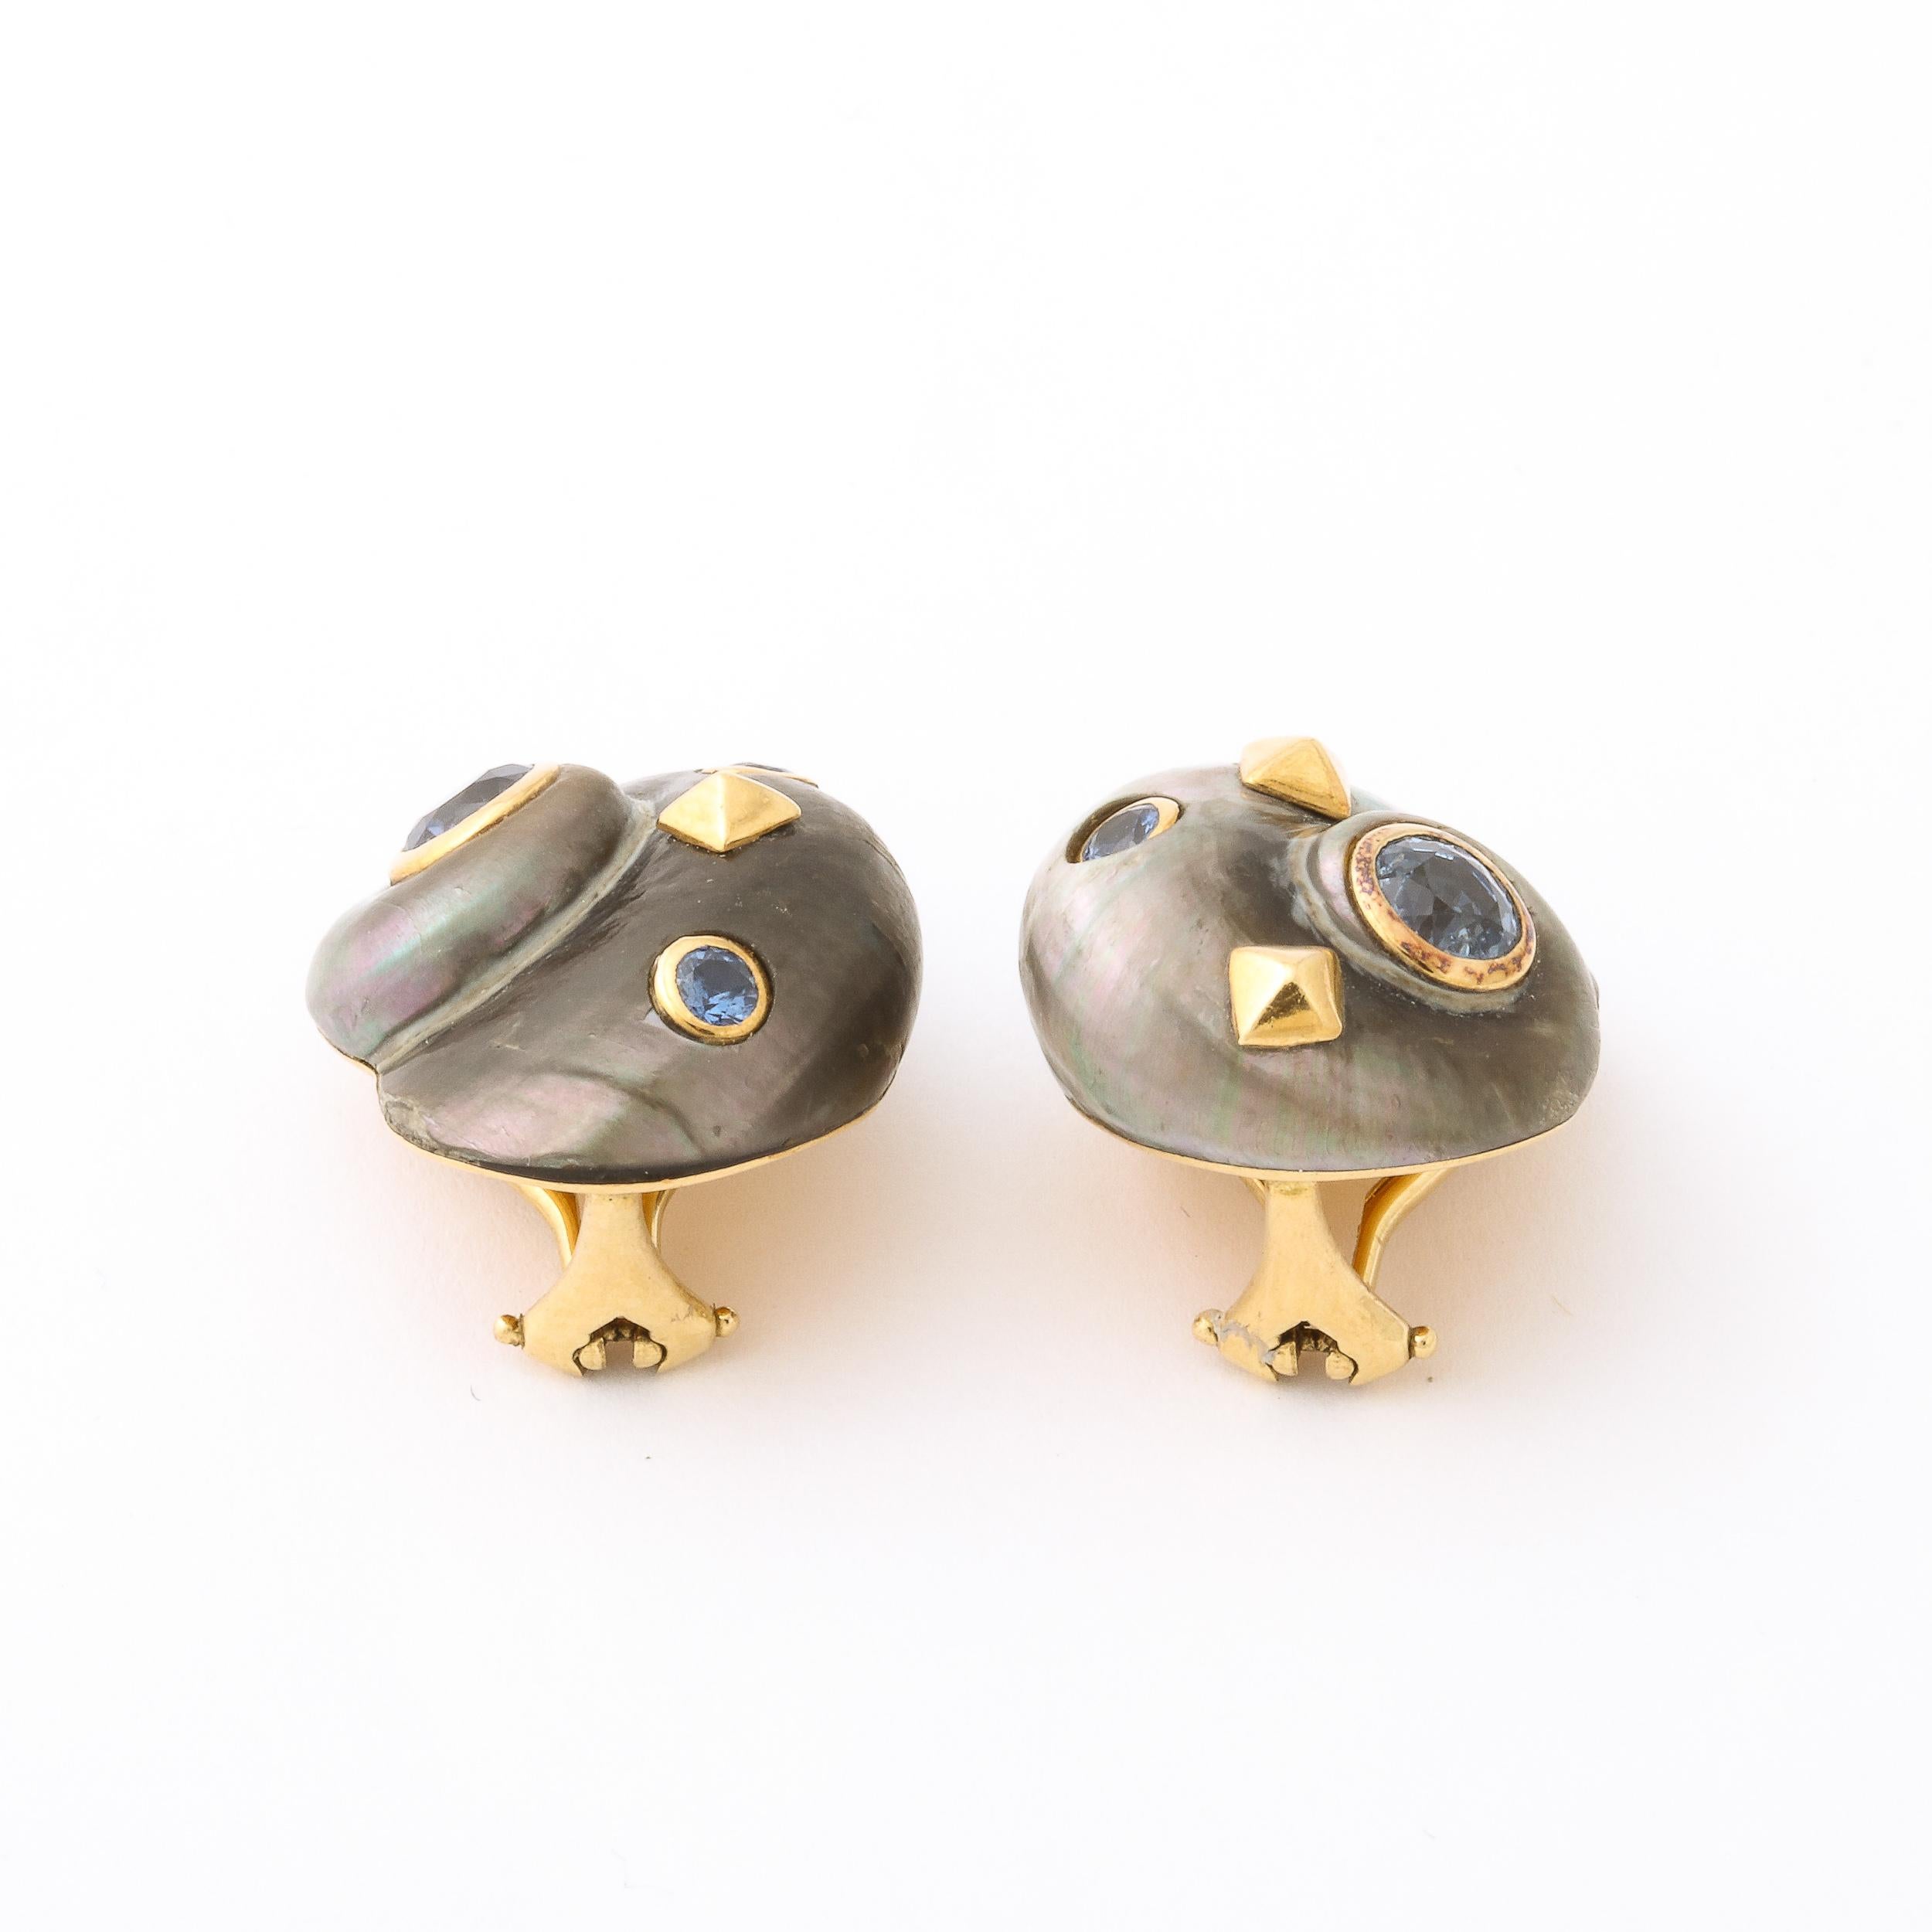 Iridescent Grey Shell Earrings Set in 18k Gold & Inlaid Blue Topaz by Trianon 6